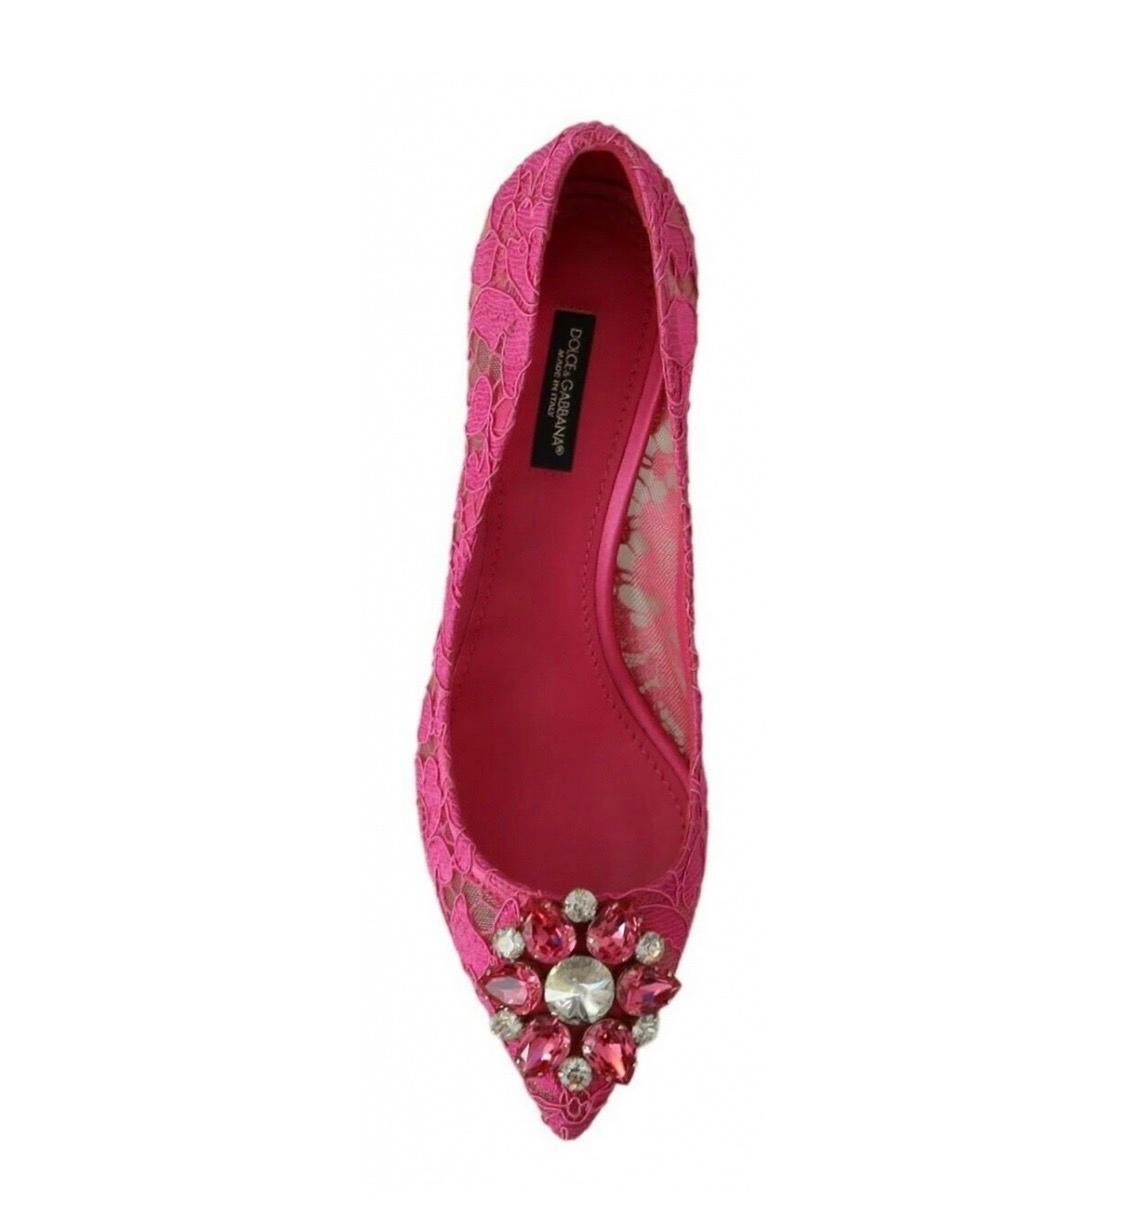 Pink Dolce & Gabbana pink PUMP lace shoes with jewel detail on
the top heels  For Sale